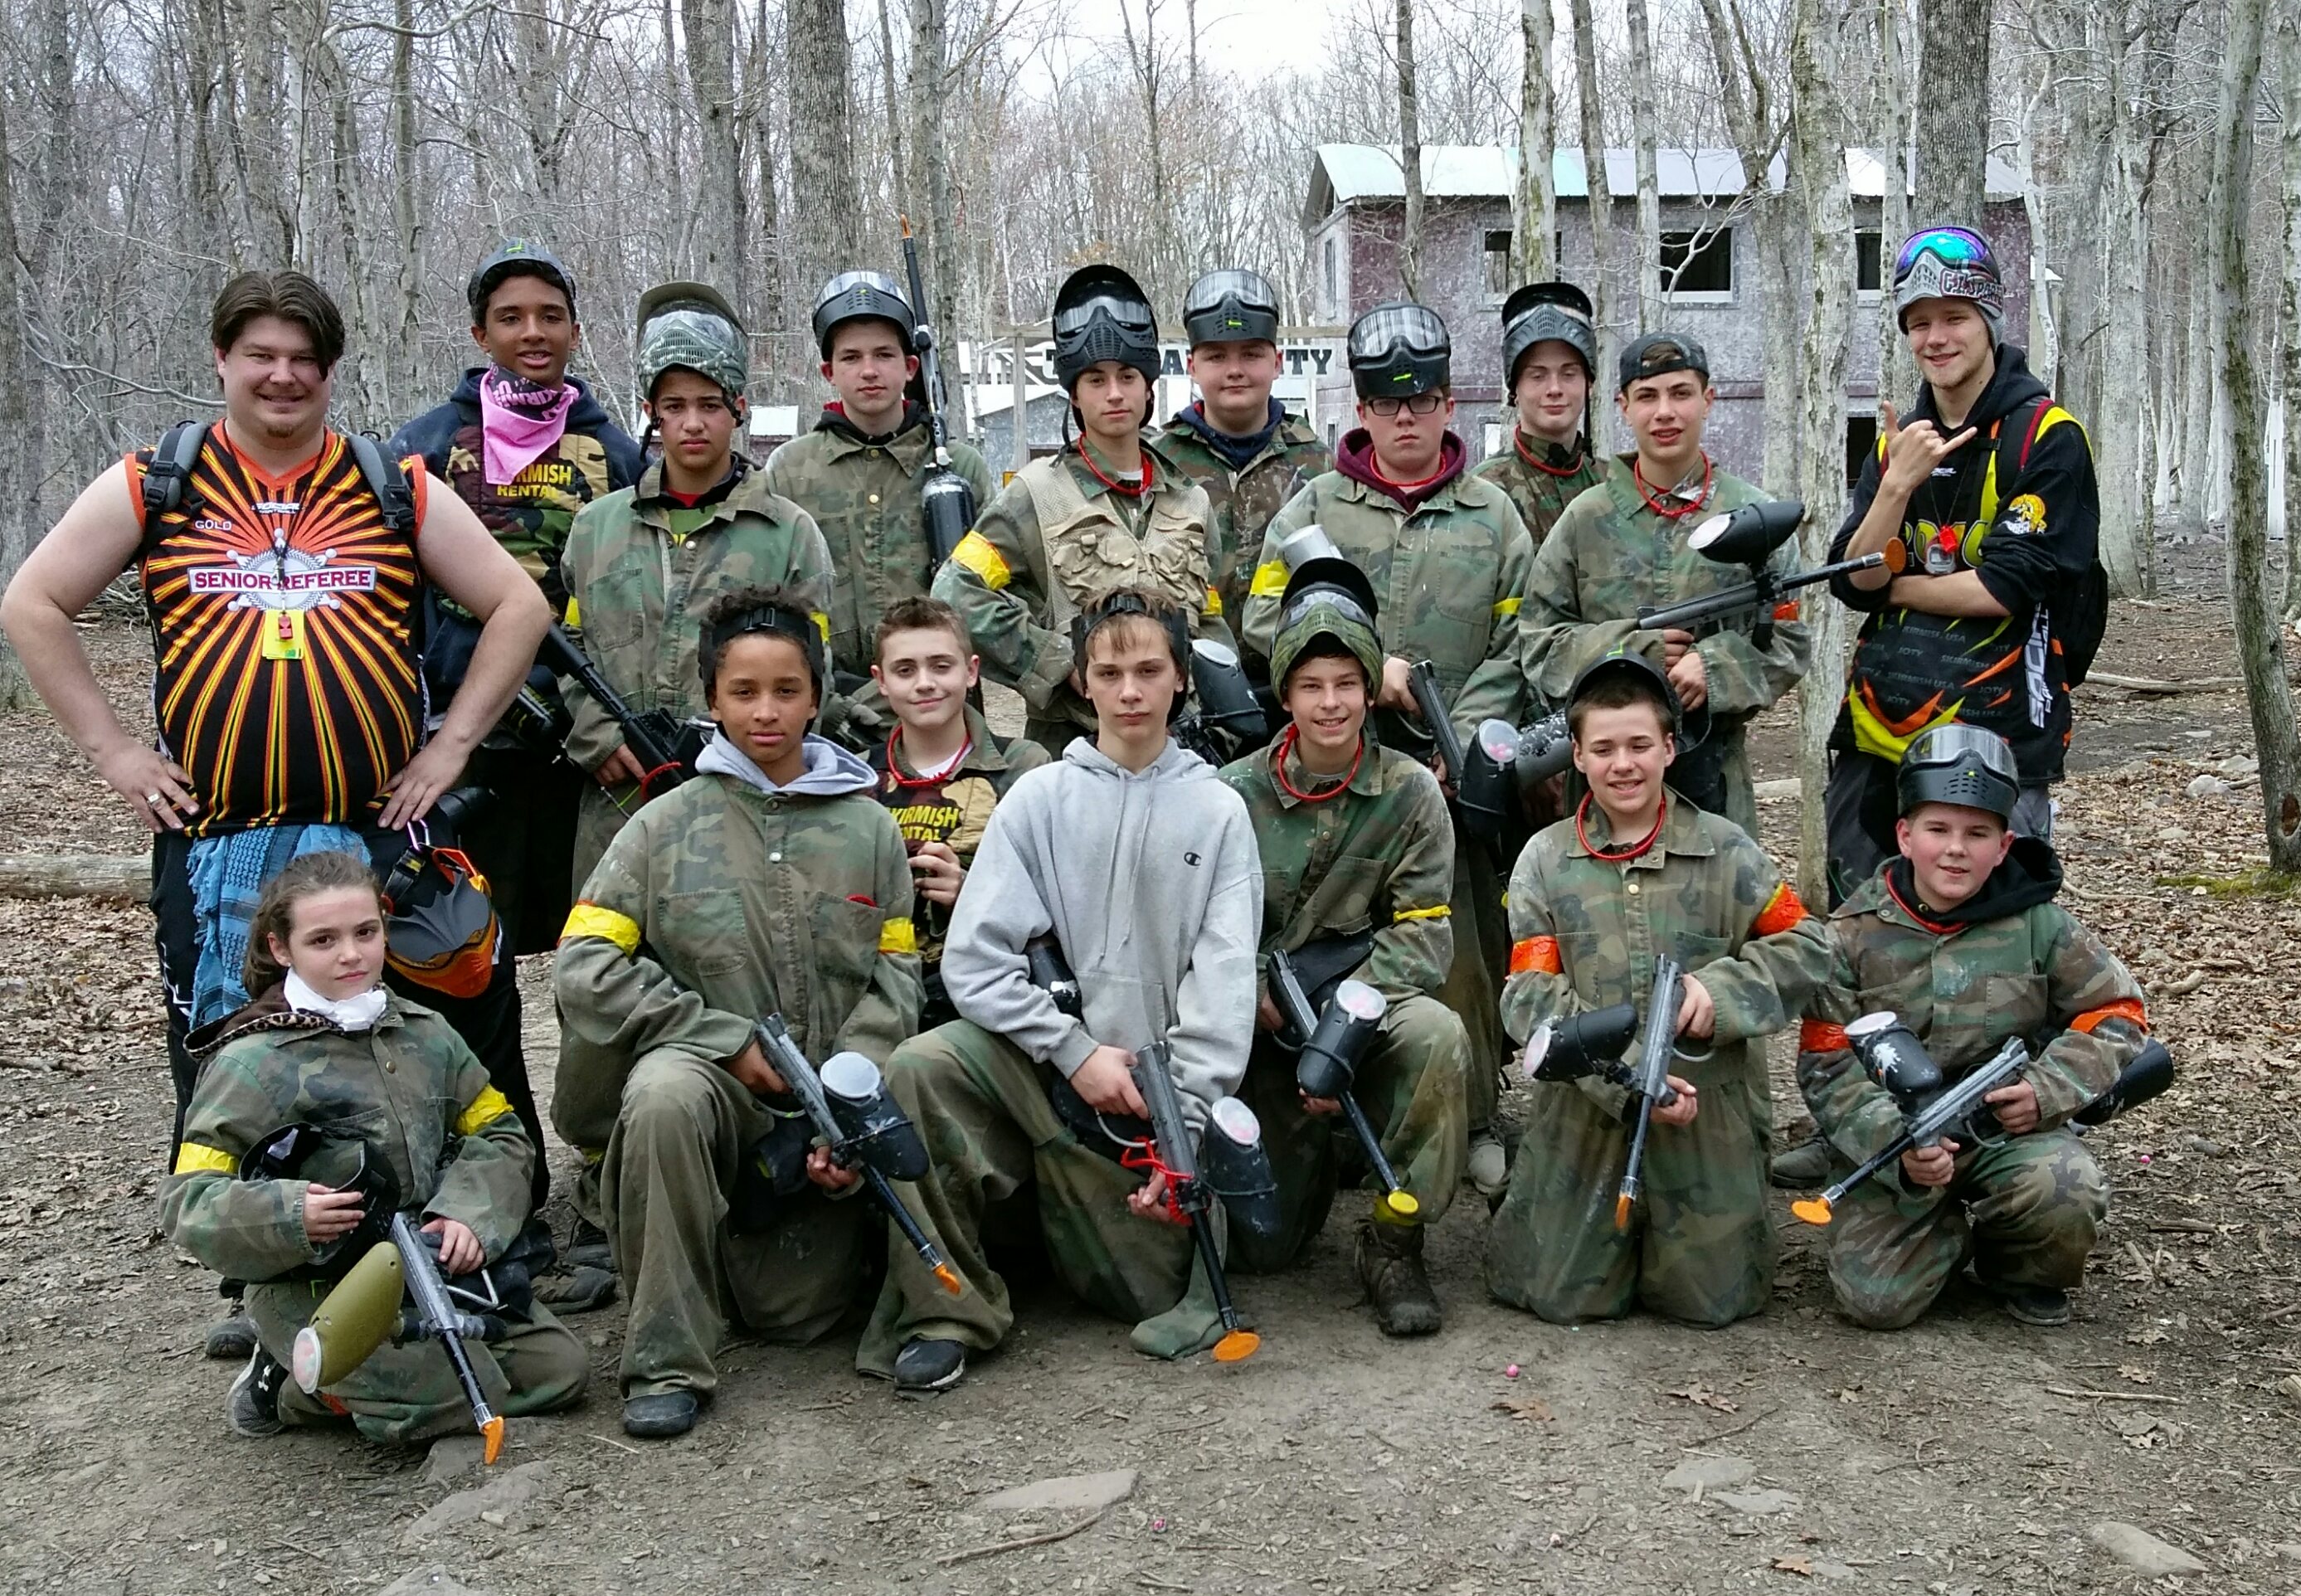 Skirmish Paintball's Paintball group and referees half price student discount